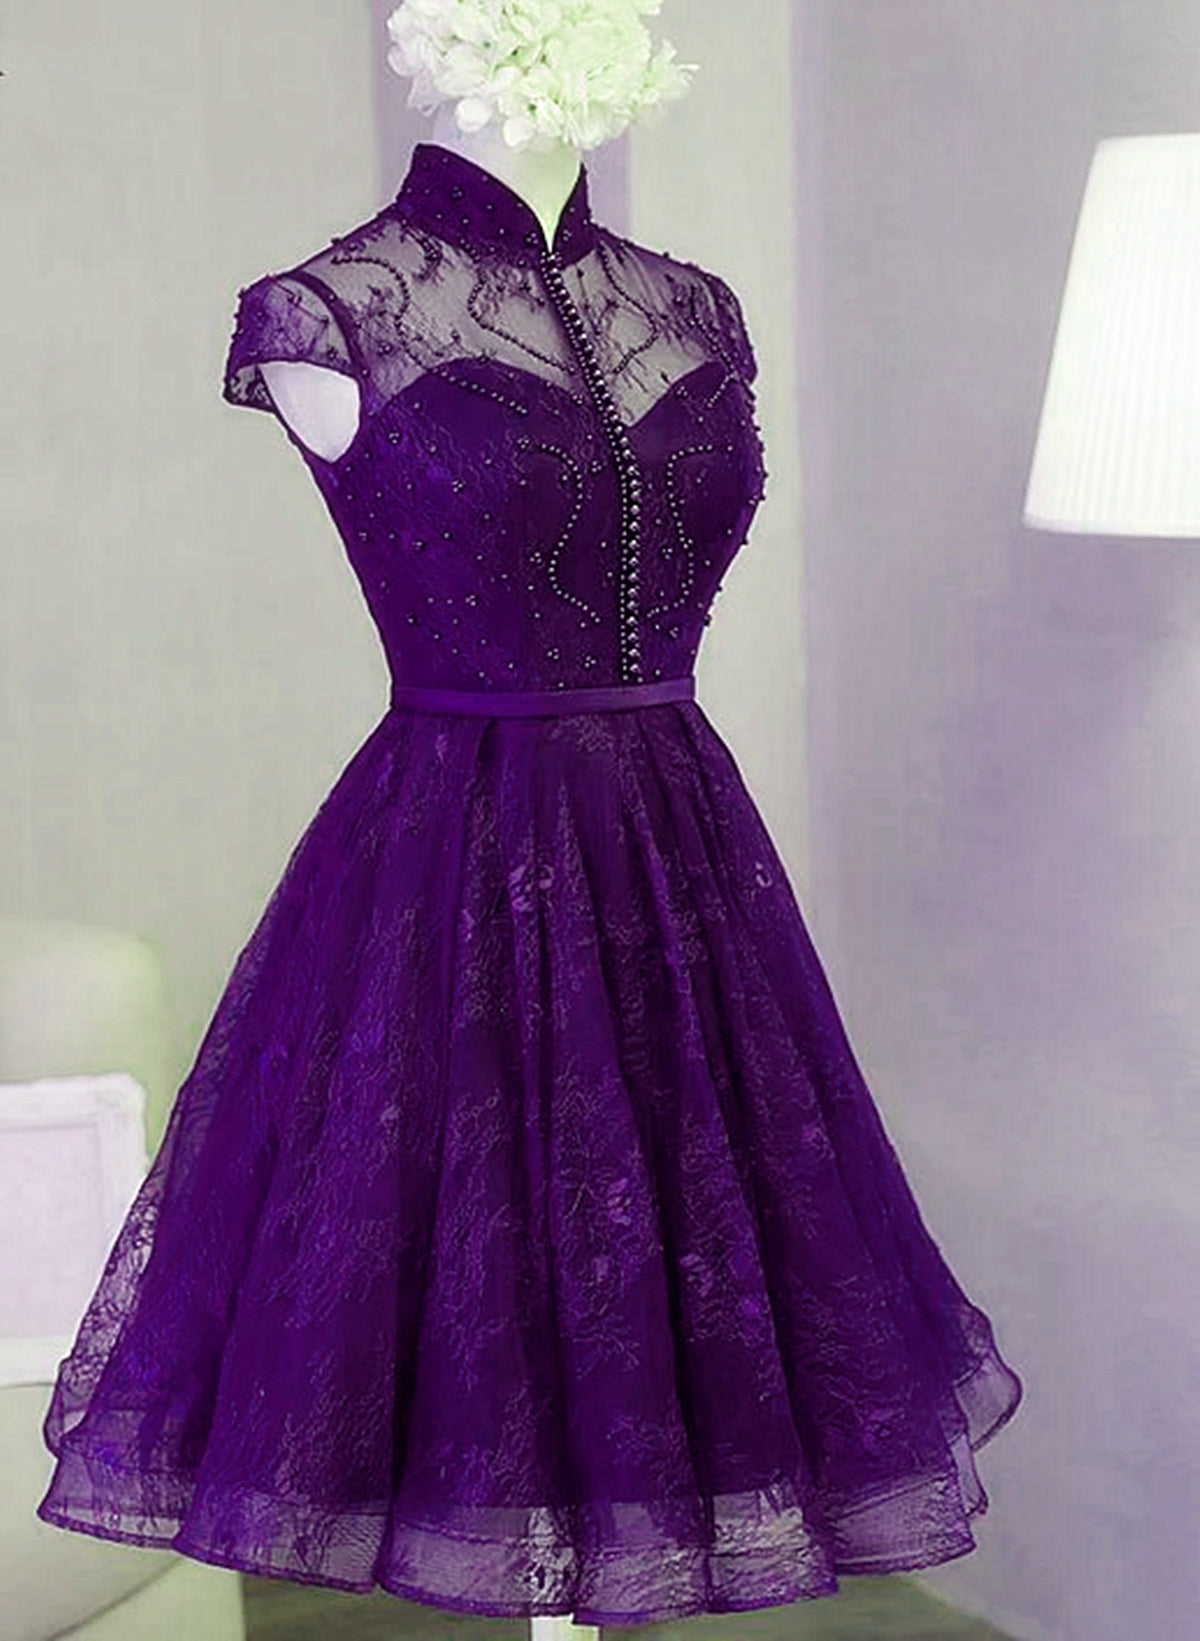 Purple Lace Knee Length Homecoming Dress Outfits For Girls, Purple Lace Short Prom Dress